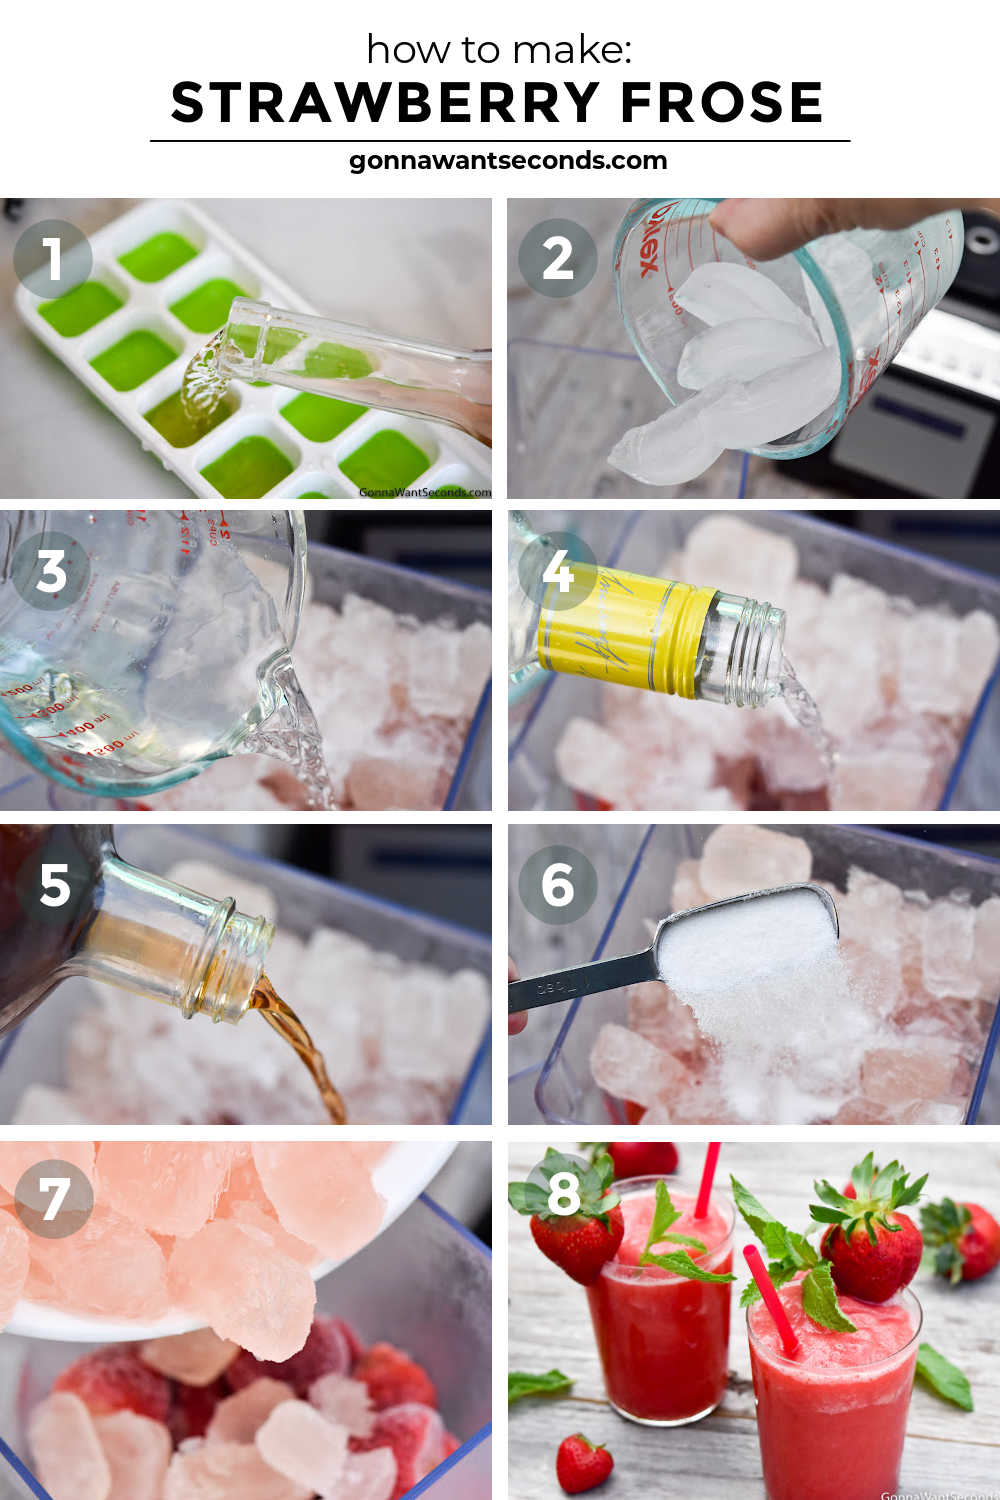 Step by step how to make strawberry frose